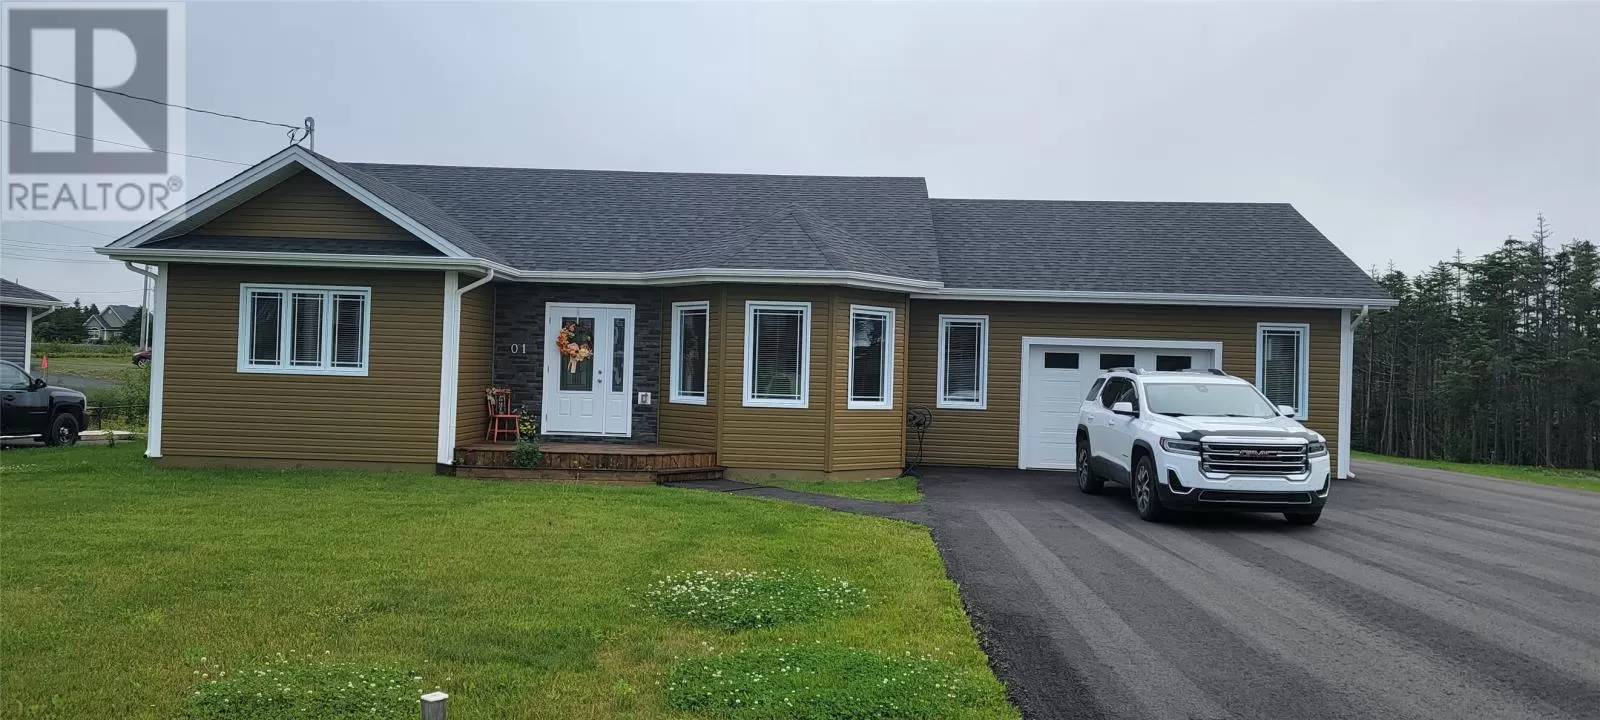 House for rent: 1 Isaac's Point Street, Marystown, Newfoundland & Labrador A0E 2M0